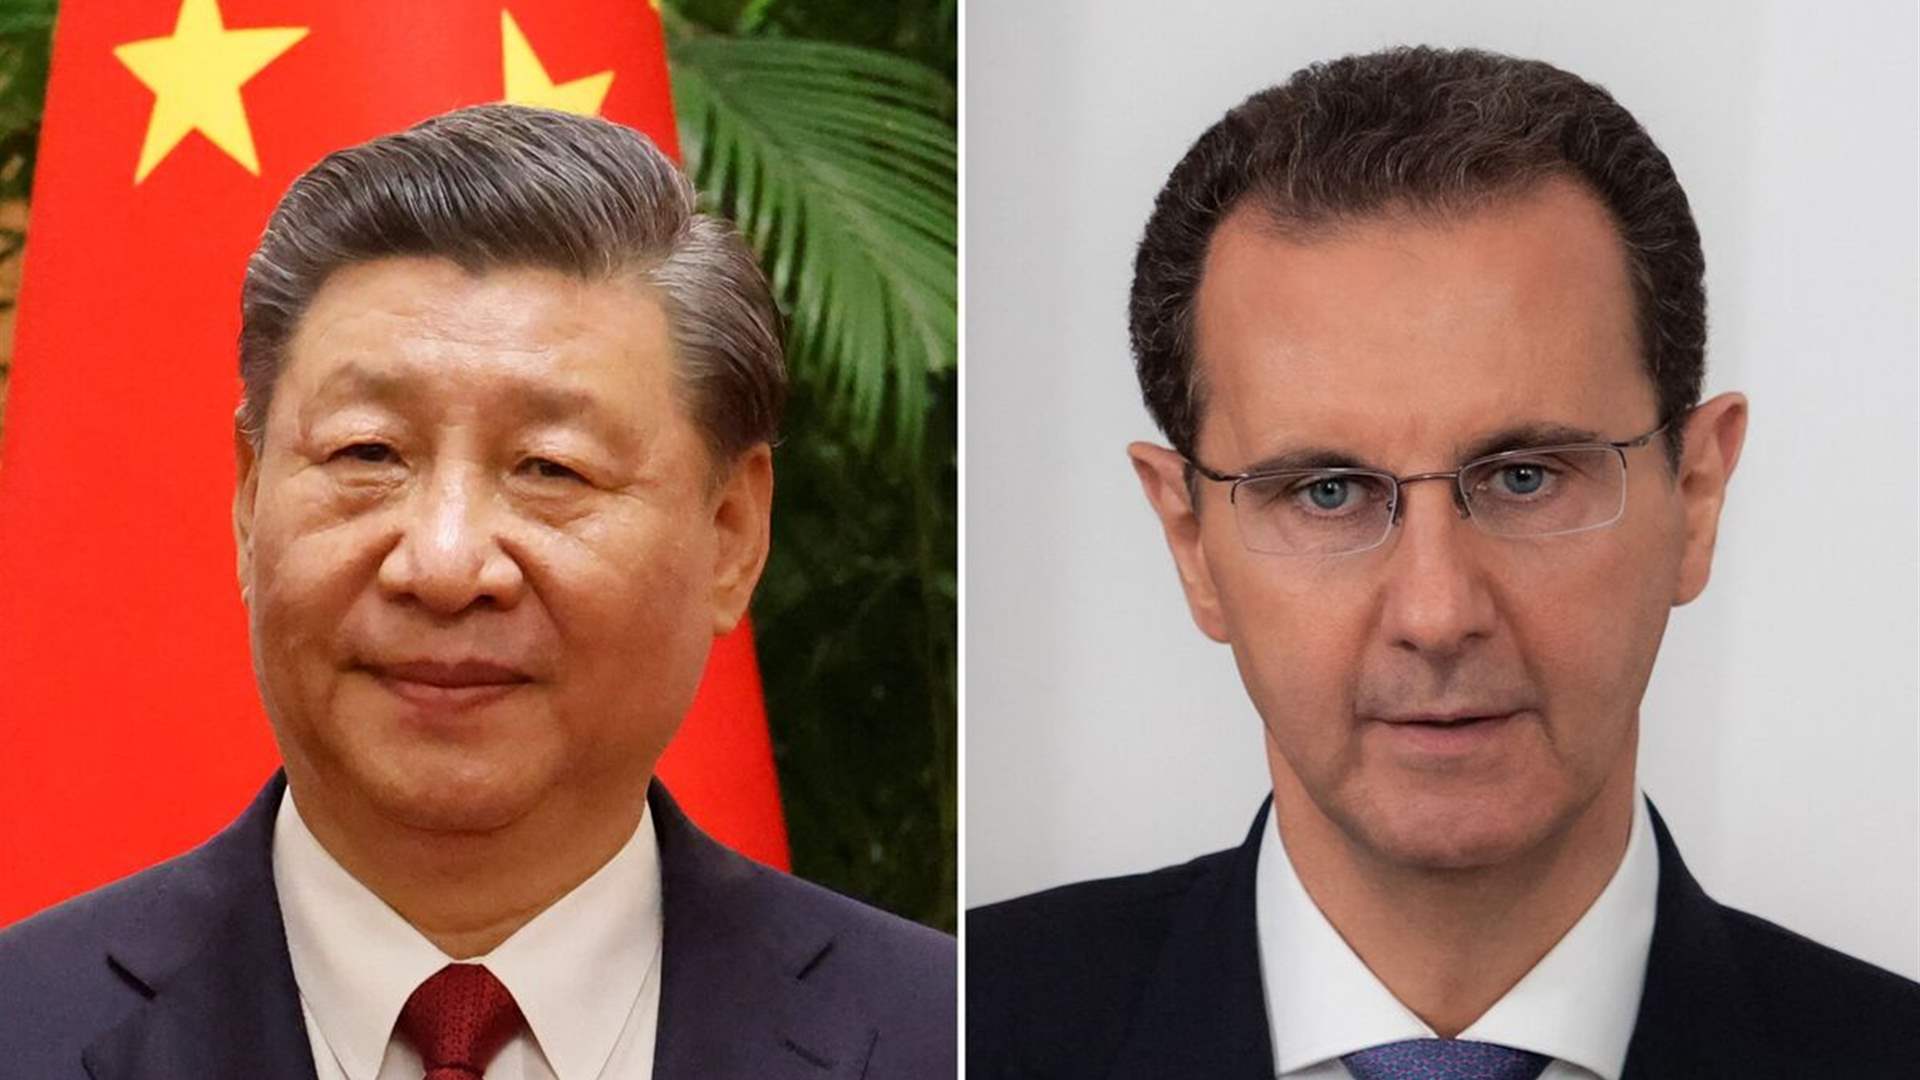 Chinese President Xi Jinping will receive his Syrian counterpart Bashar al-Assad: State media